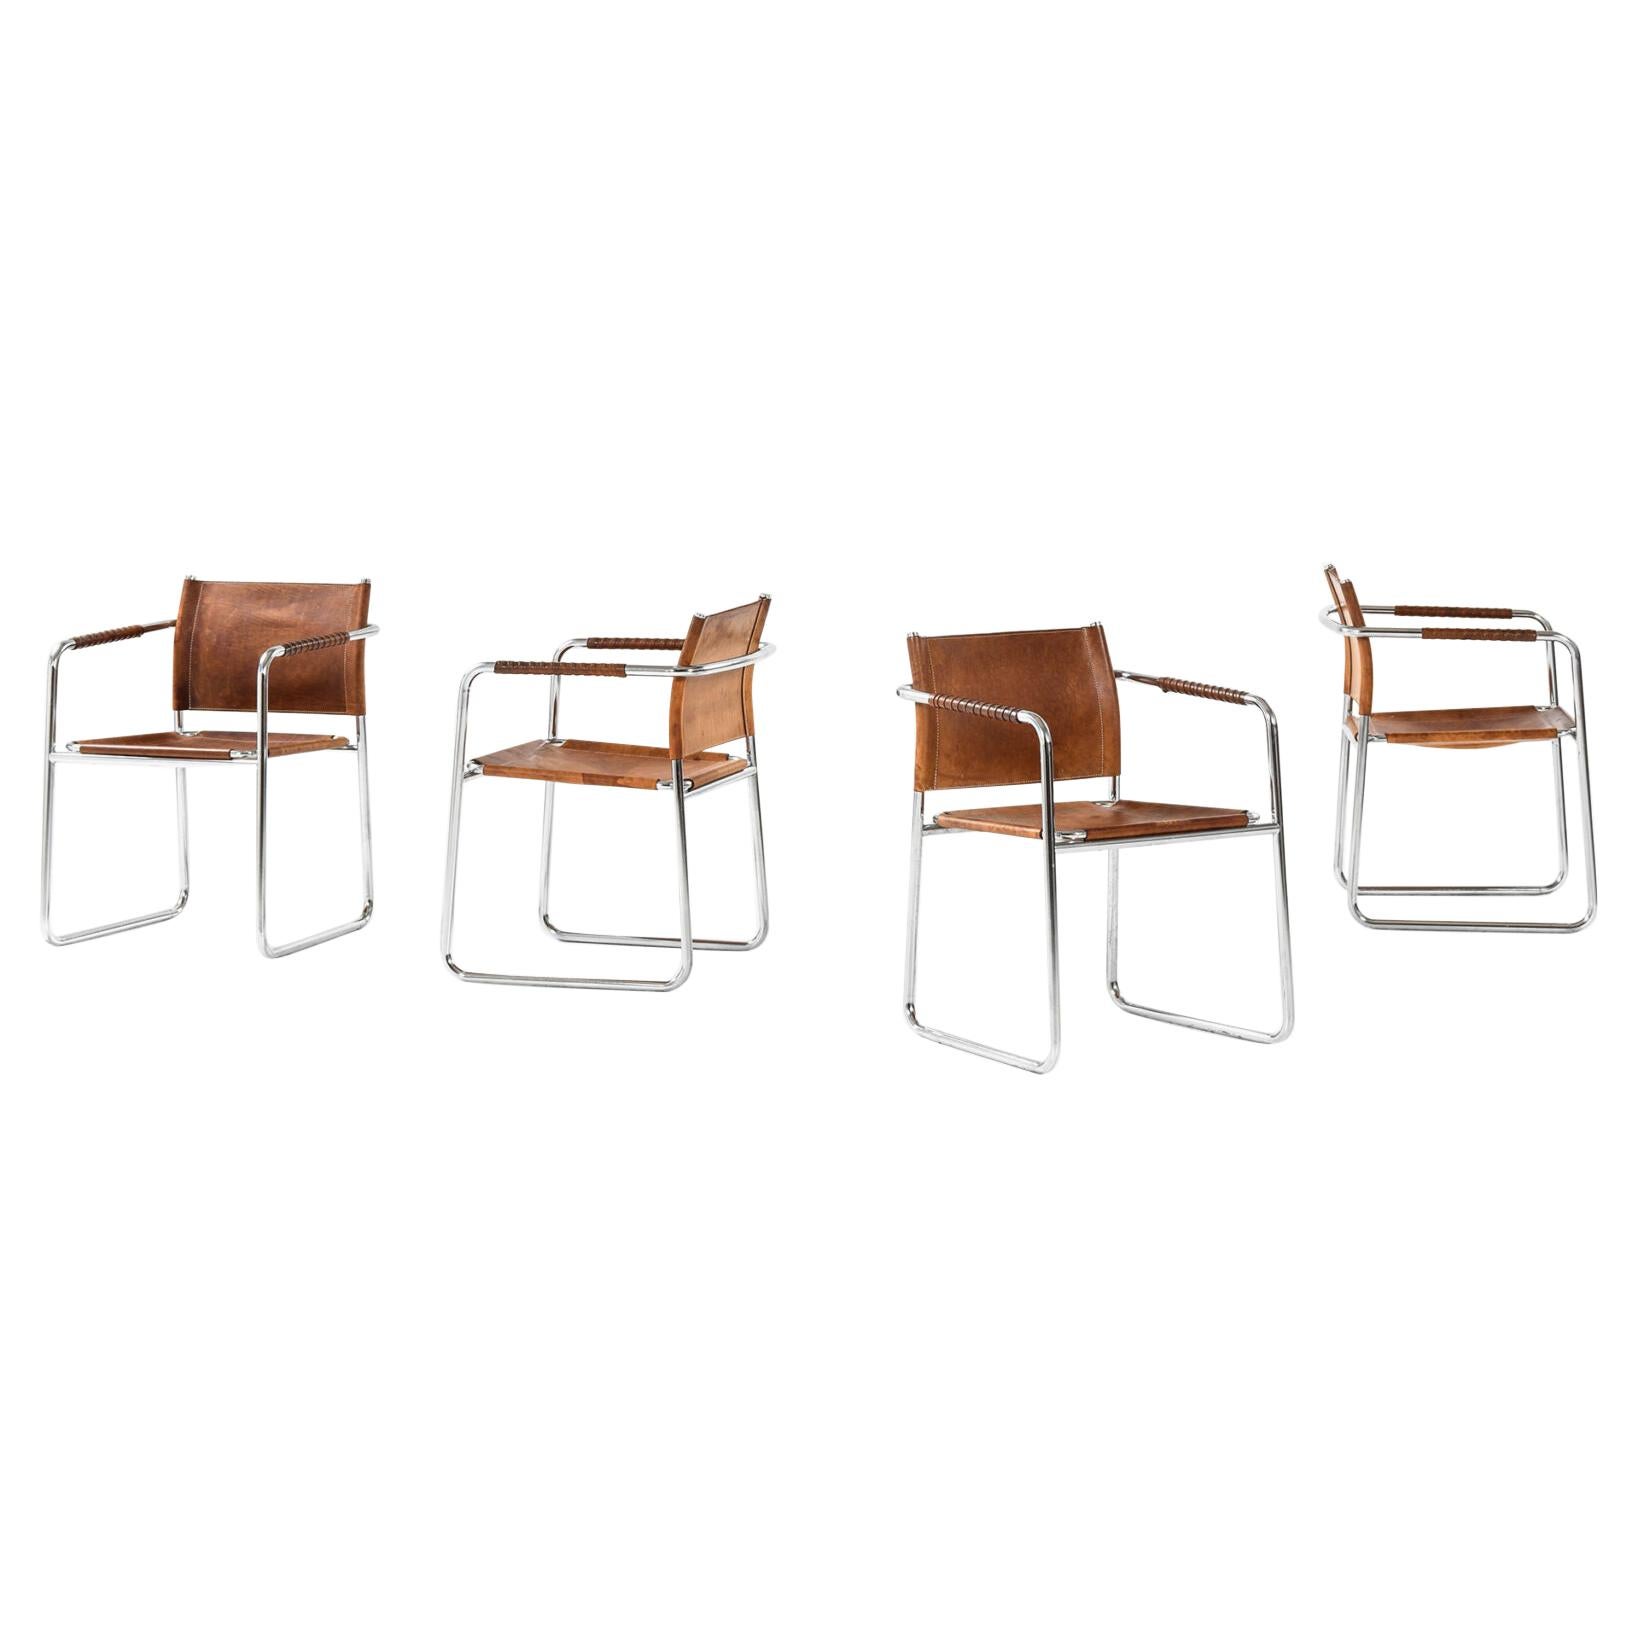 Karin Mobring Armchairs Model Amiral Produced in Sweden